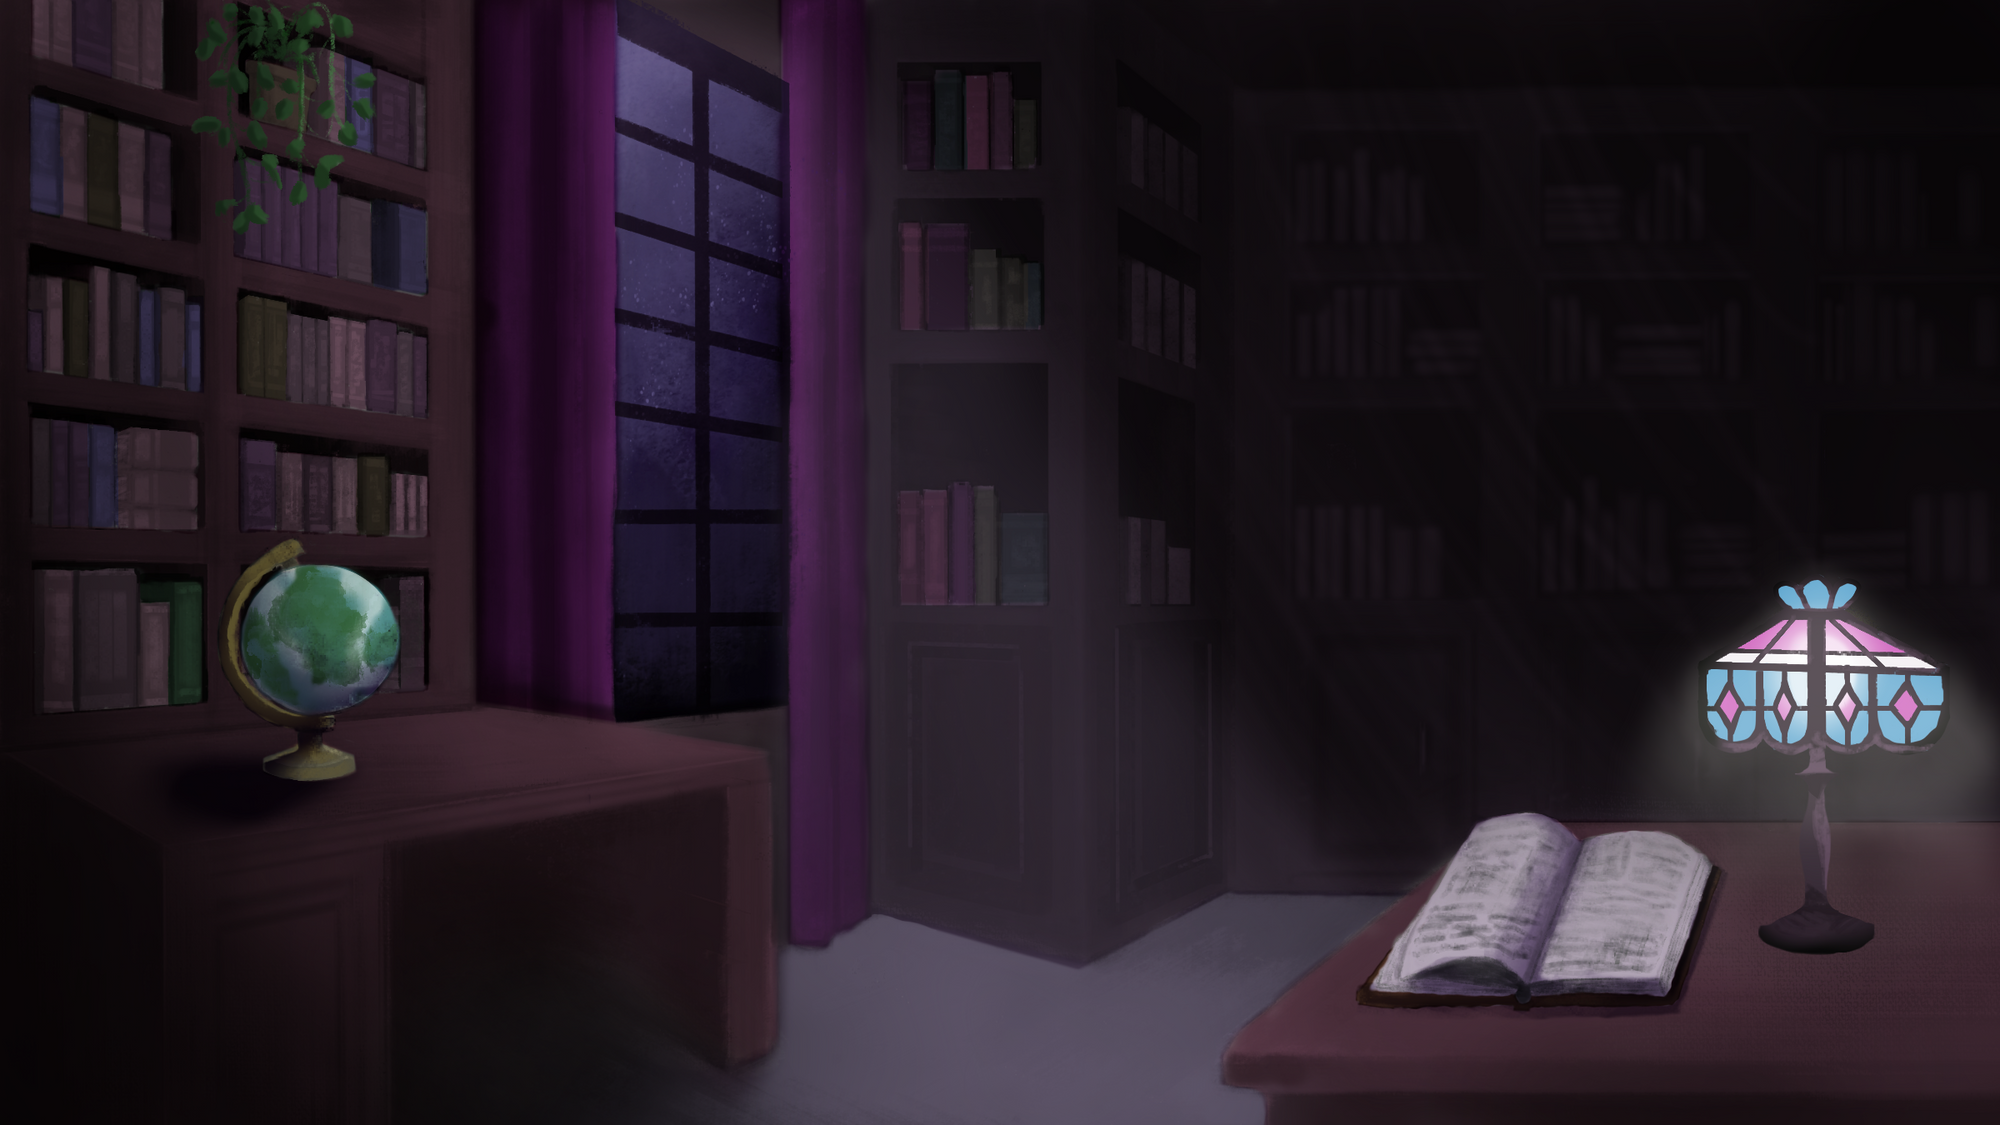 An illustration of a moody library with dark shelves, a plant, and a globe lit by a trans flag colored lamp.